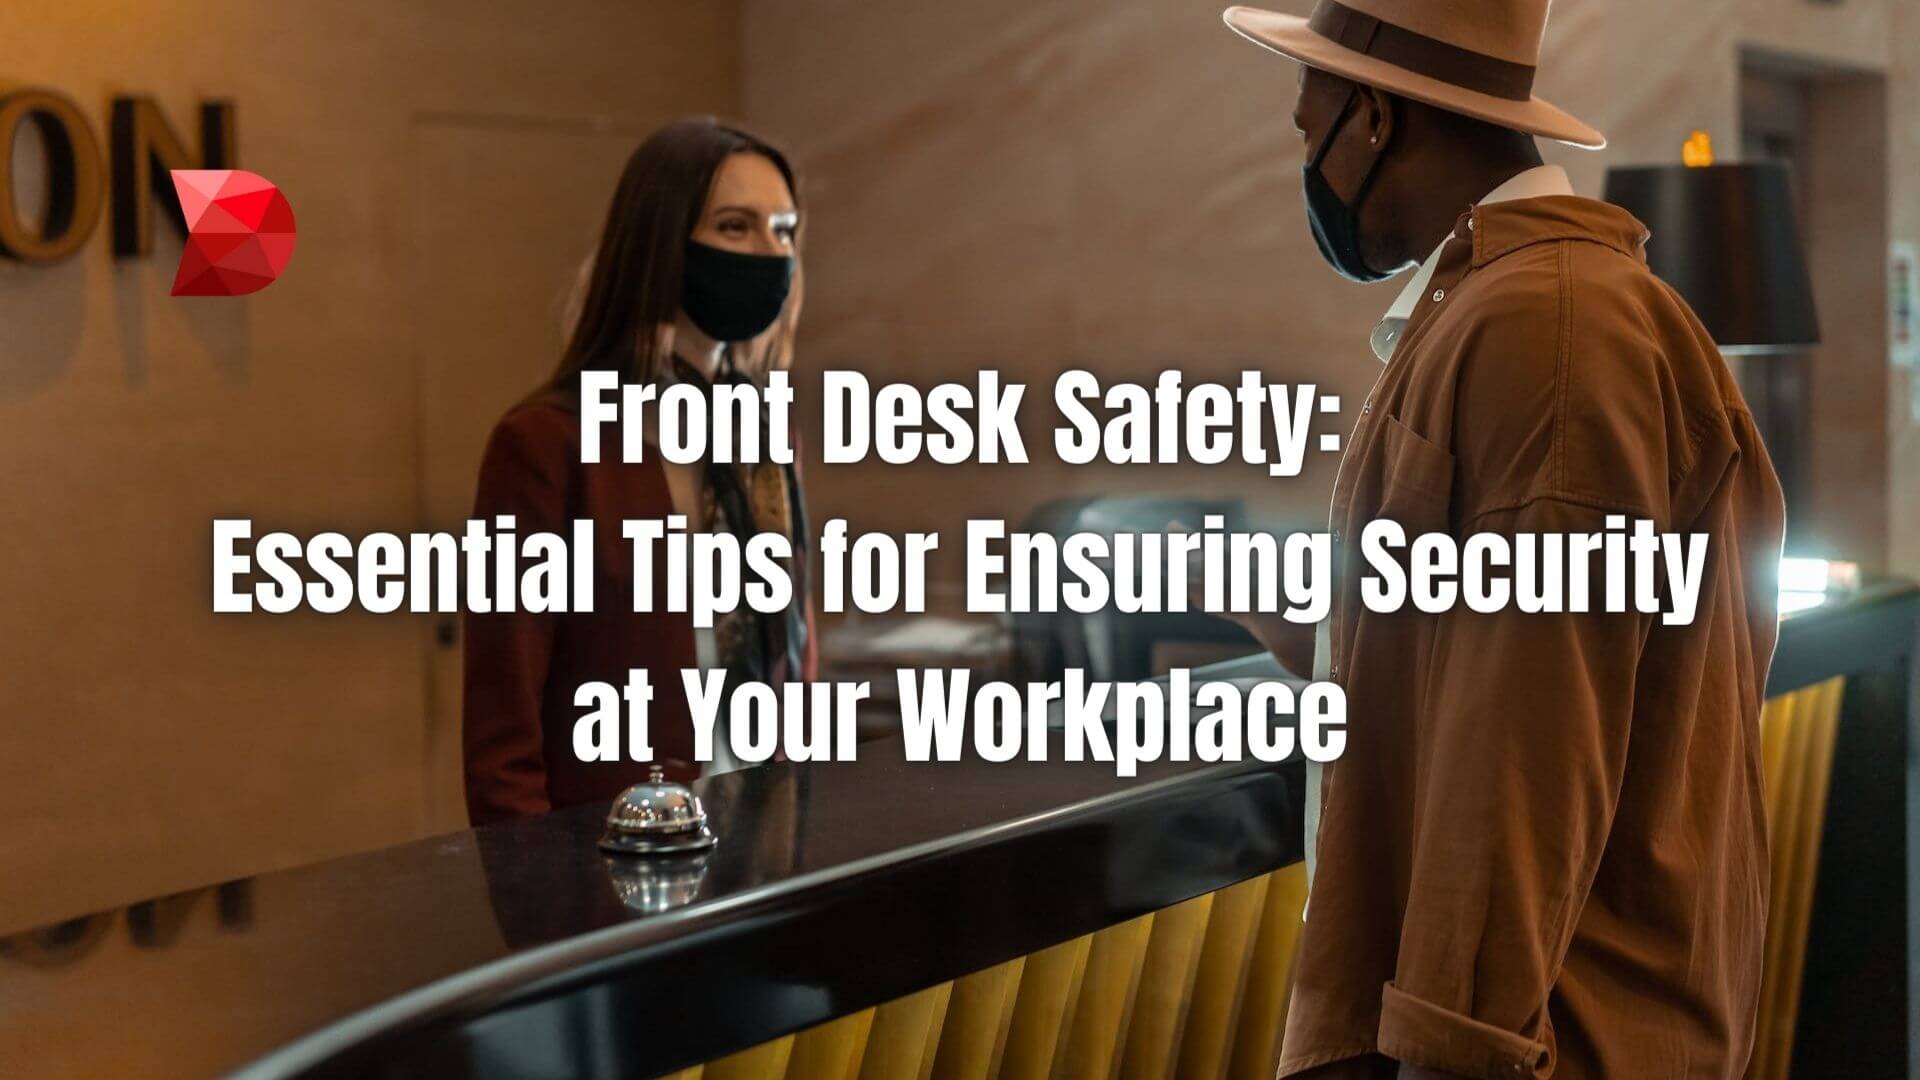 Enhance workplace security with our essential guide to front desk safety. Learn expert tips to safeguard your workplace effectively.